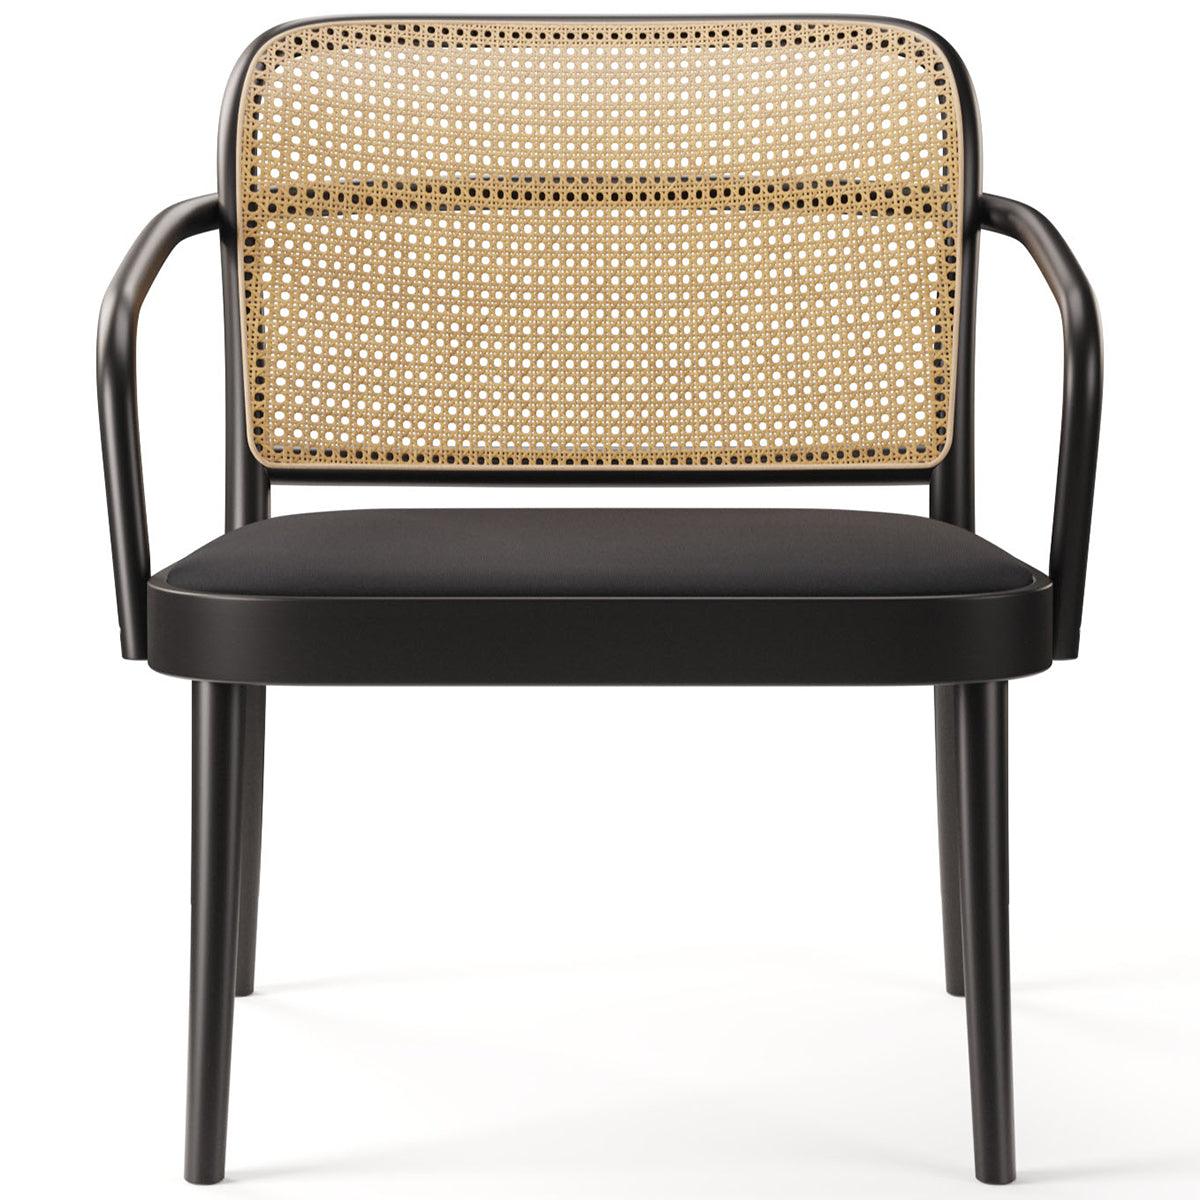 811 Upholstered/Cane Lounge Armchair - WOO .Design